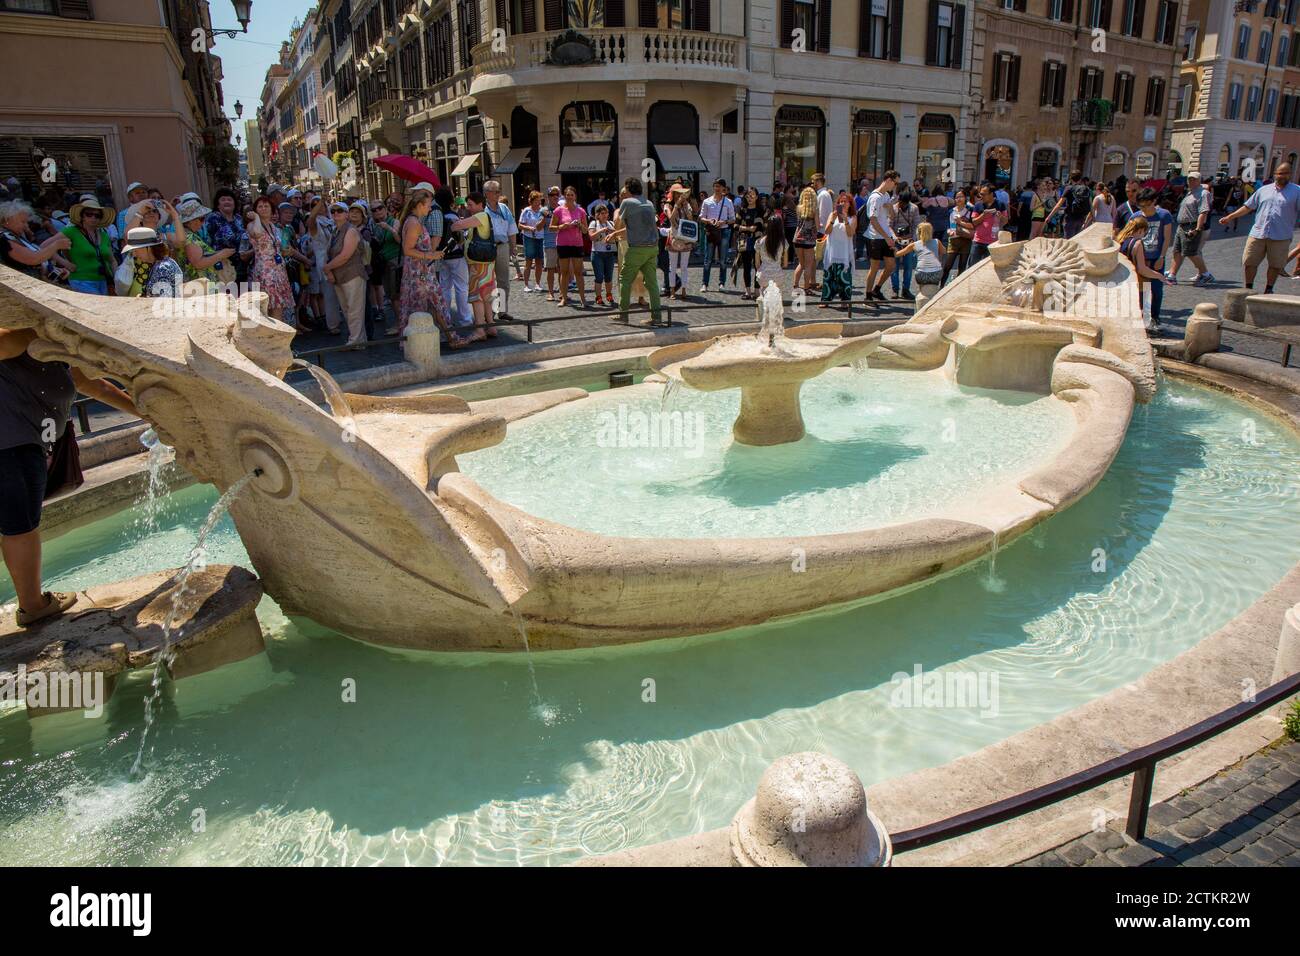 Rome, Lazio region, Italy.  Fontana della Barcaccia (which can be translated as “Fountain of the Worthless Boat” or “Fountain of the Ugly Boat”) was b Stock Photo